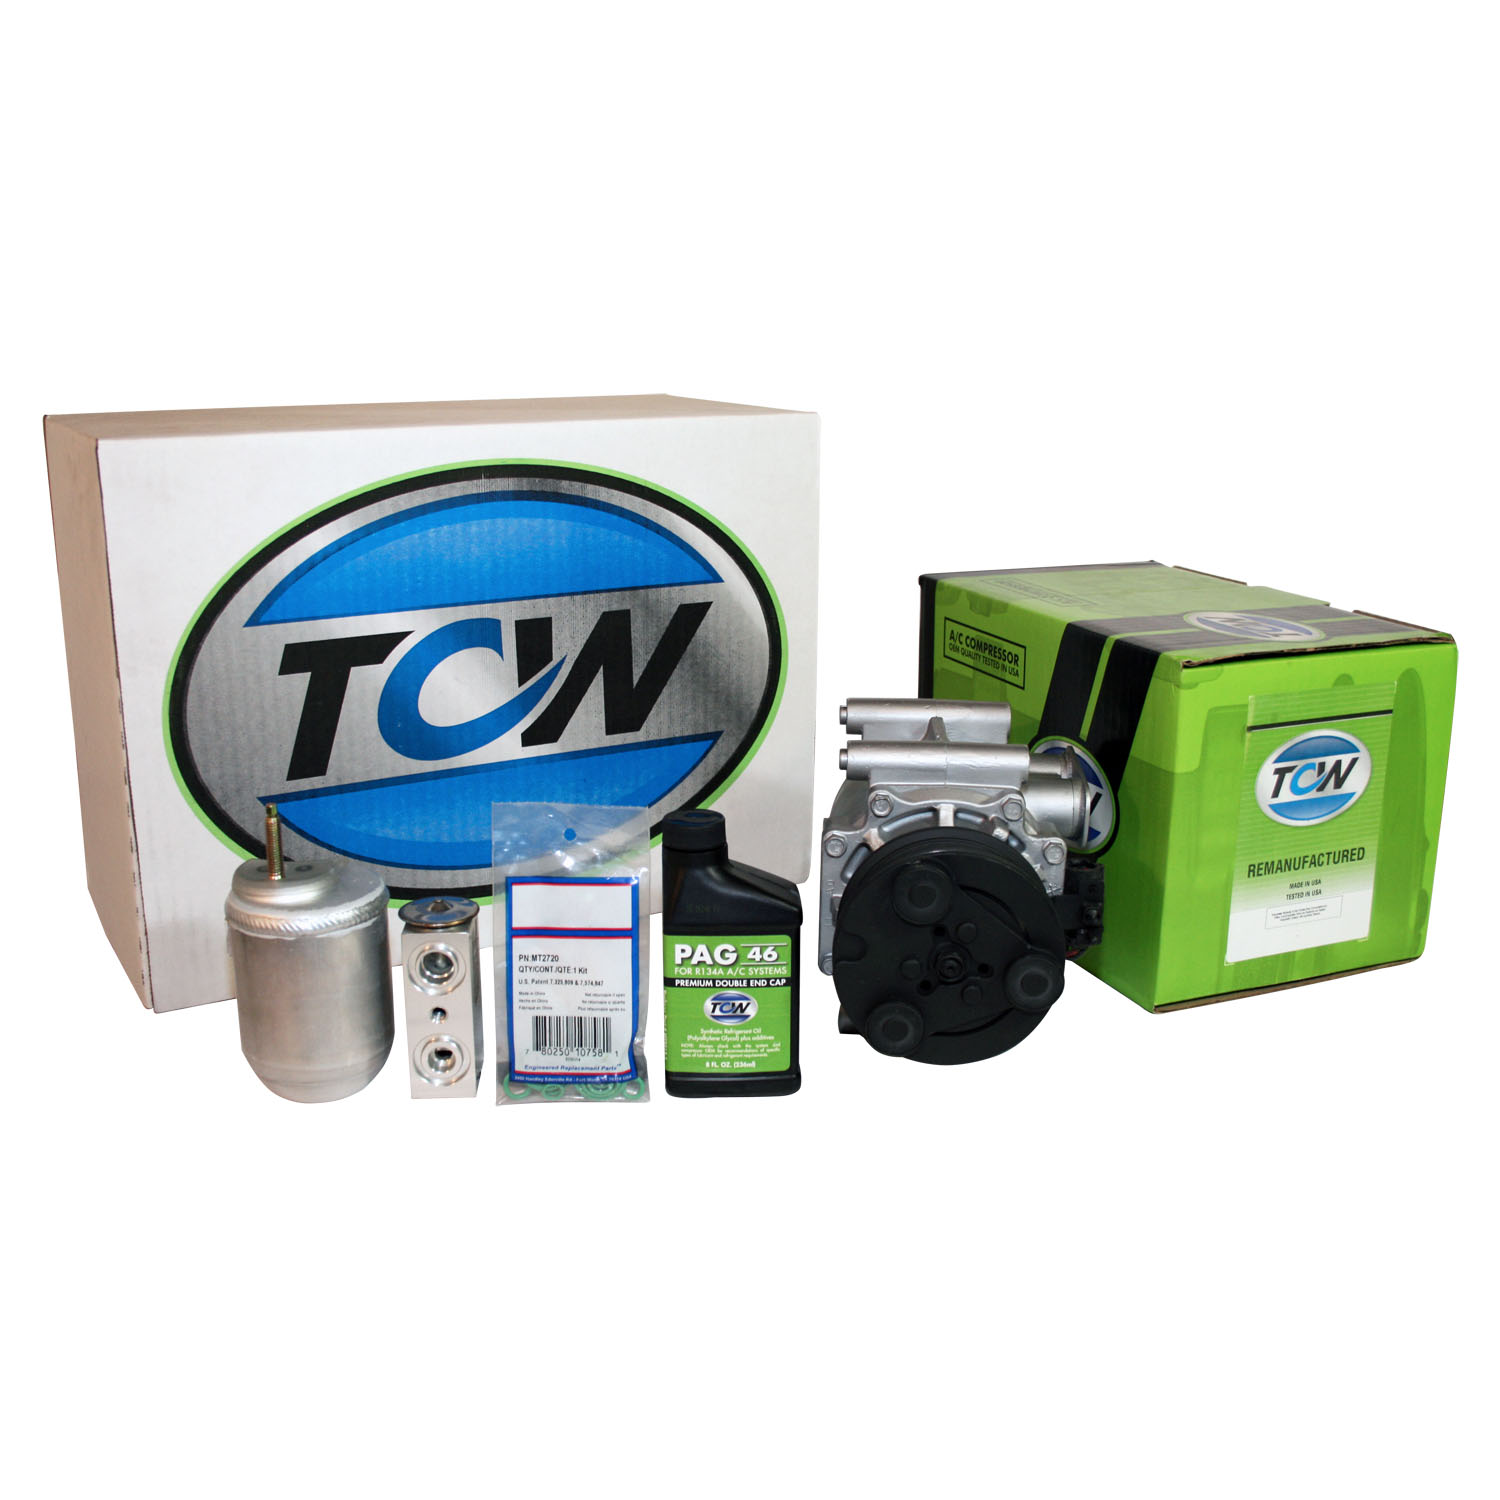 TCW Vehicle A/C Kit K1000252R Remanufactured Product Image field_60b6a13a6e67c